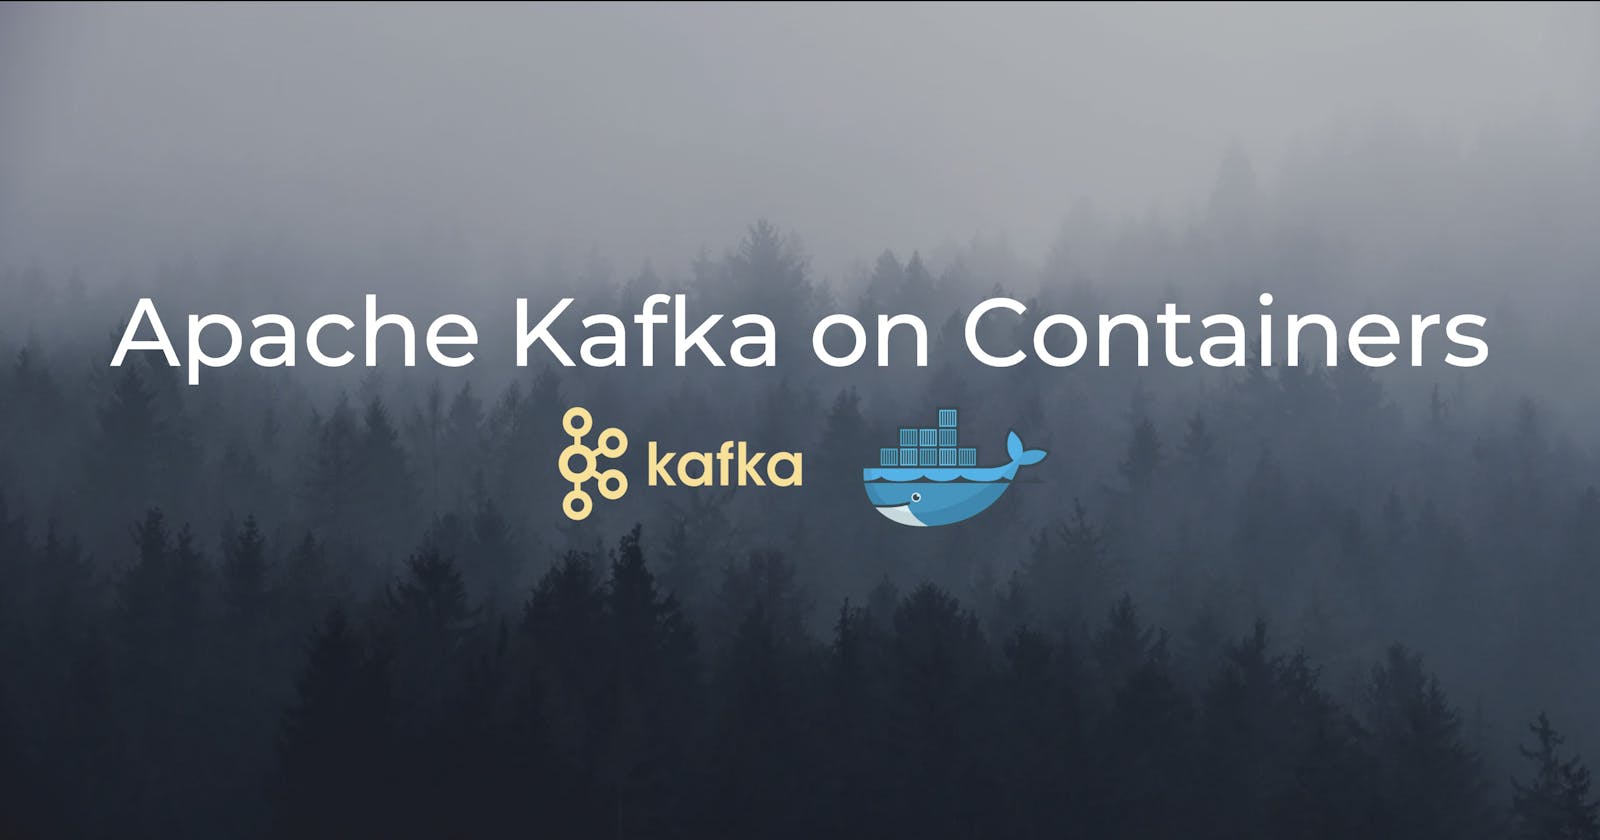 Setting up a local Apache Kafka instance for testing